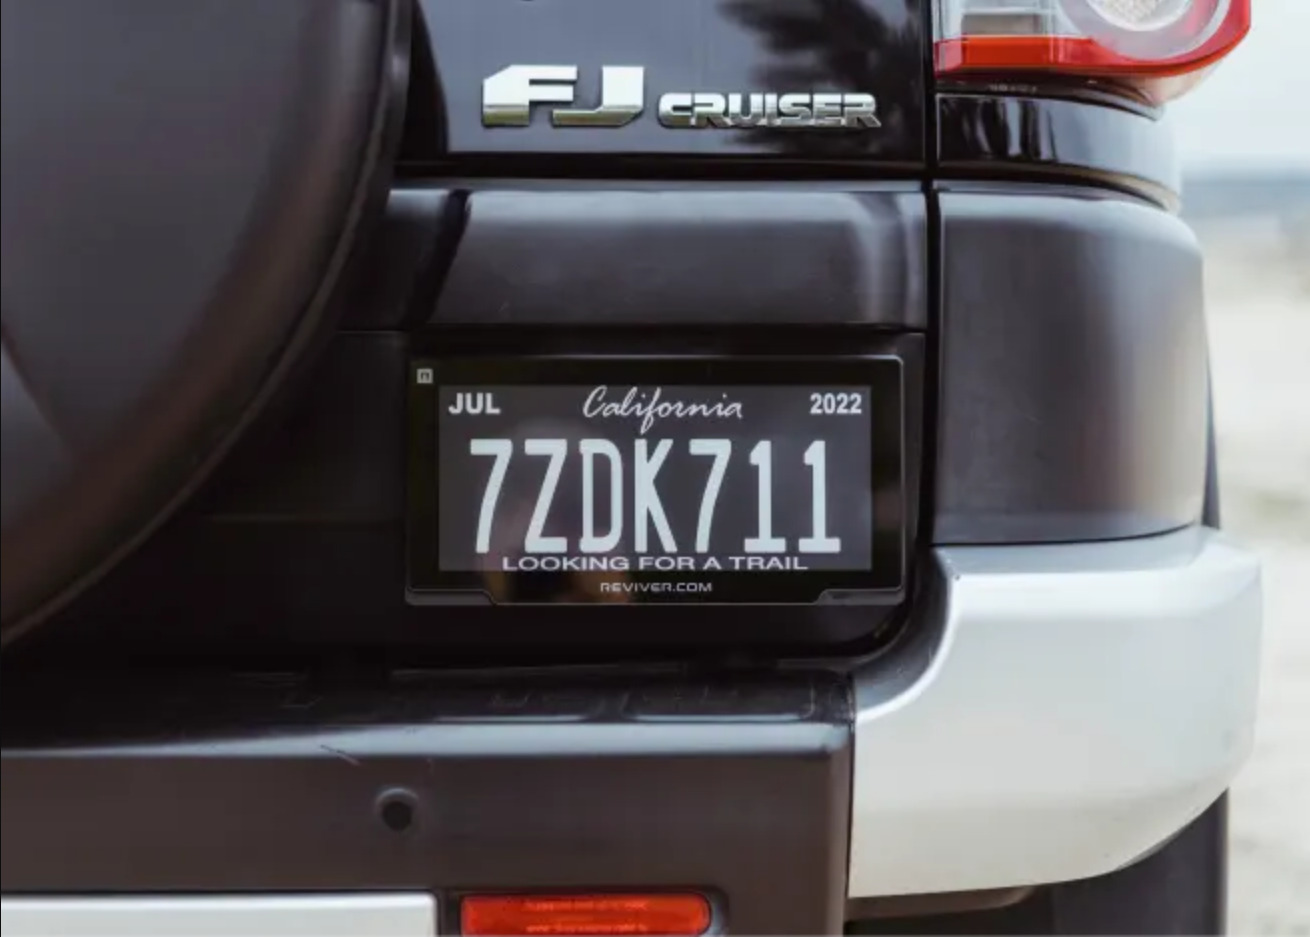 E Paper License Plates Now Street-Legal in California - IEEE Spectrum